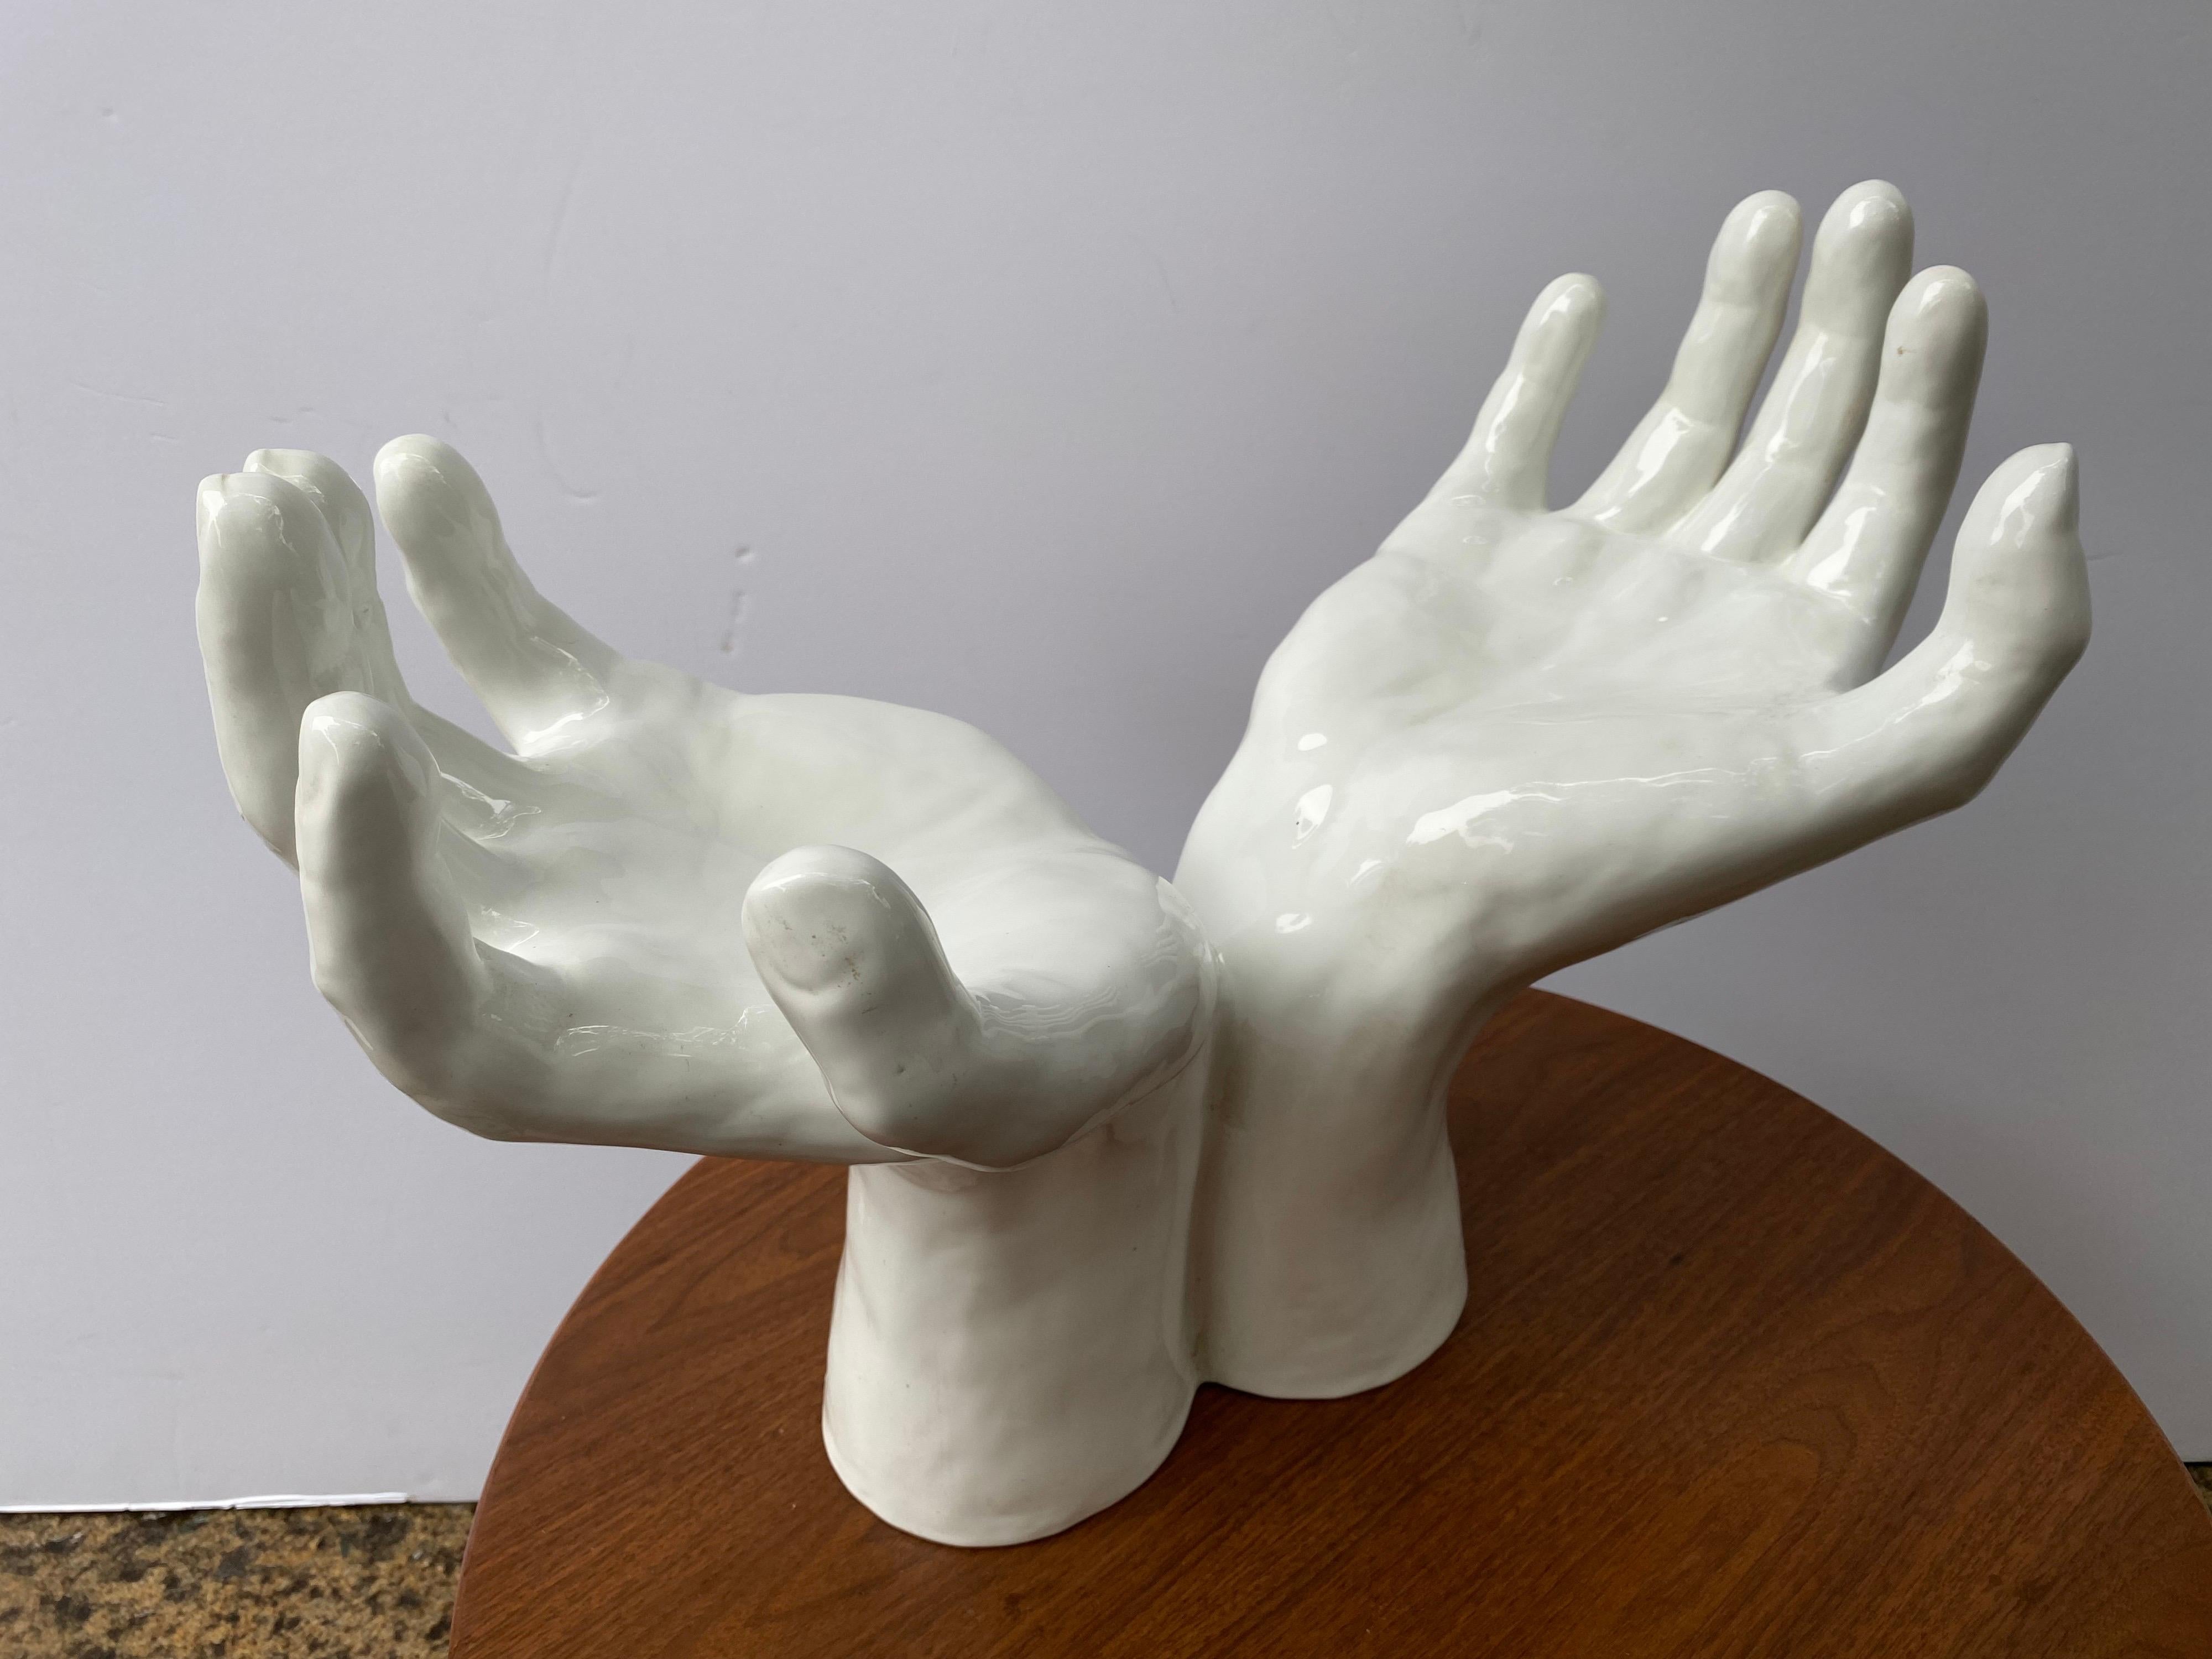 Italian ceramic hands sculpture. Large outreaching hands, measuring 22